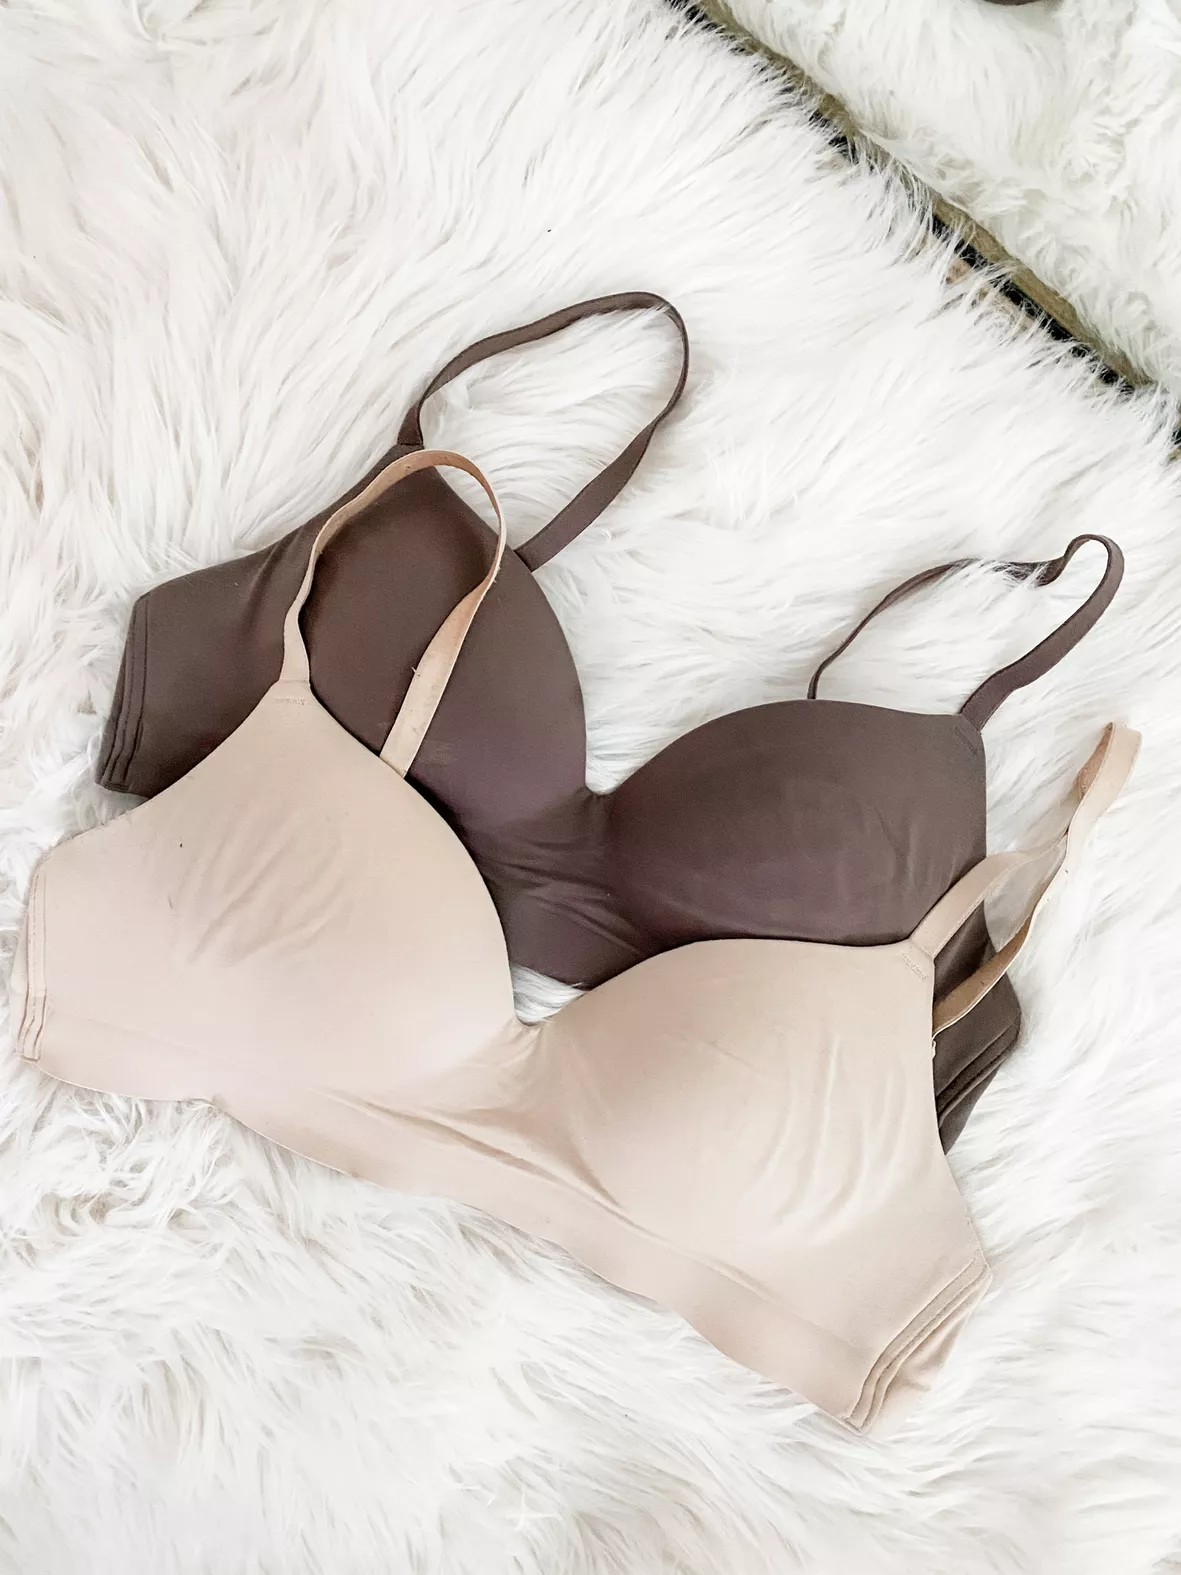 Soma Intimates - Pretty lingerie that actually does